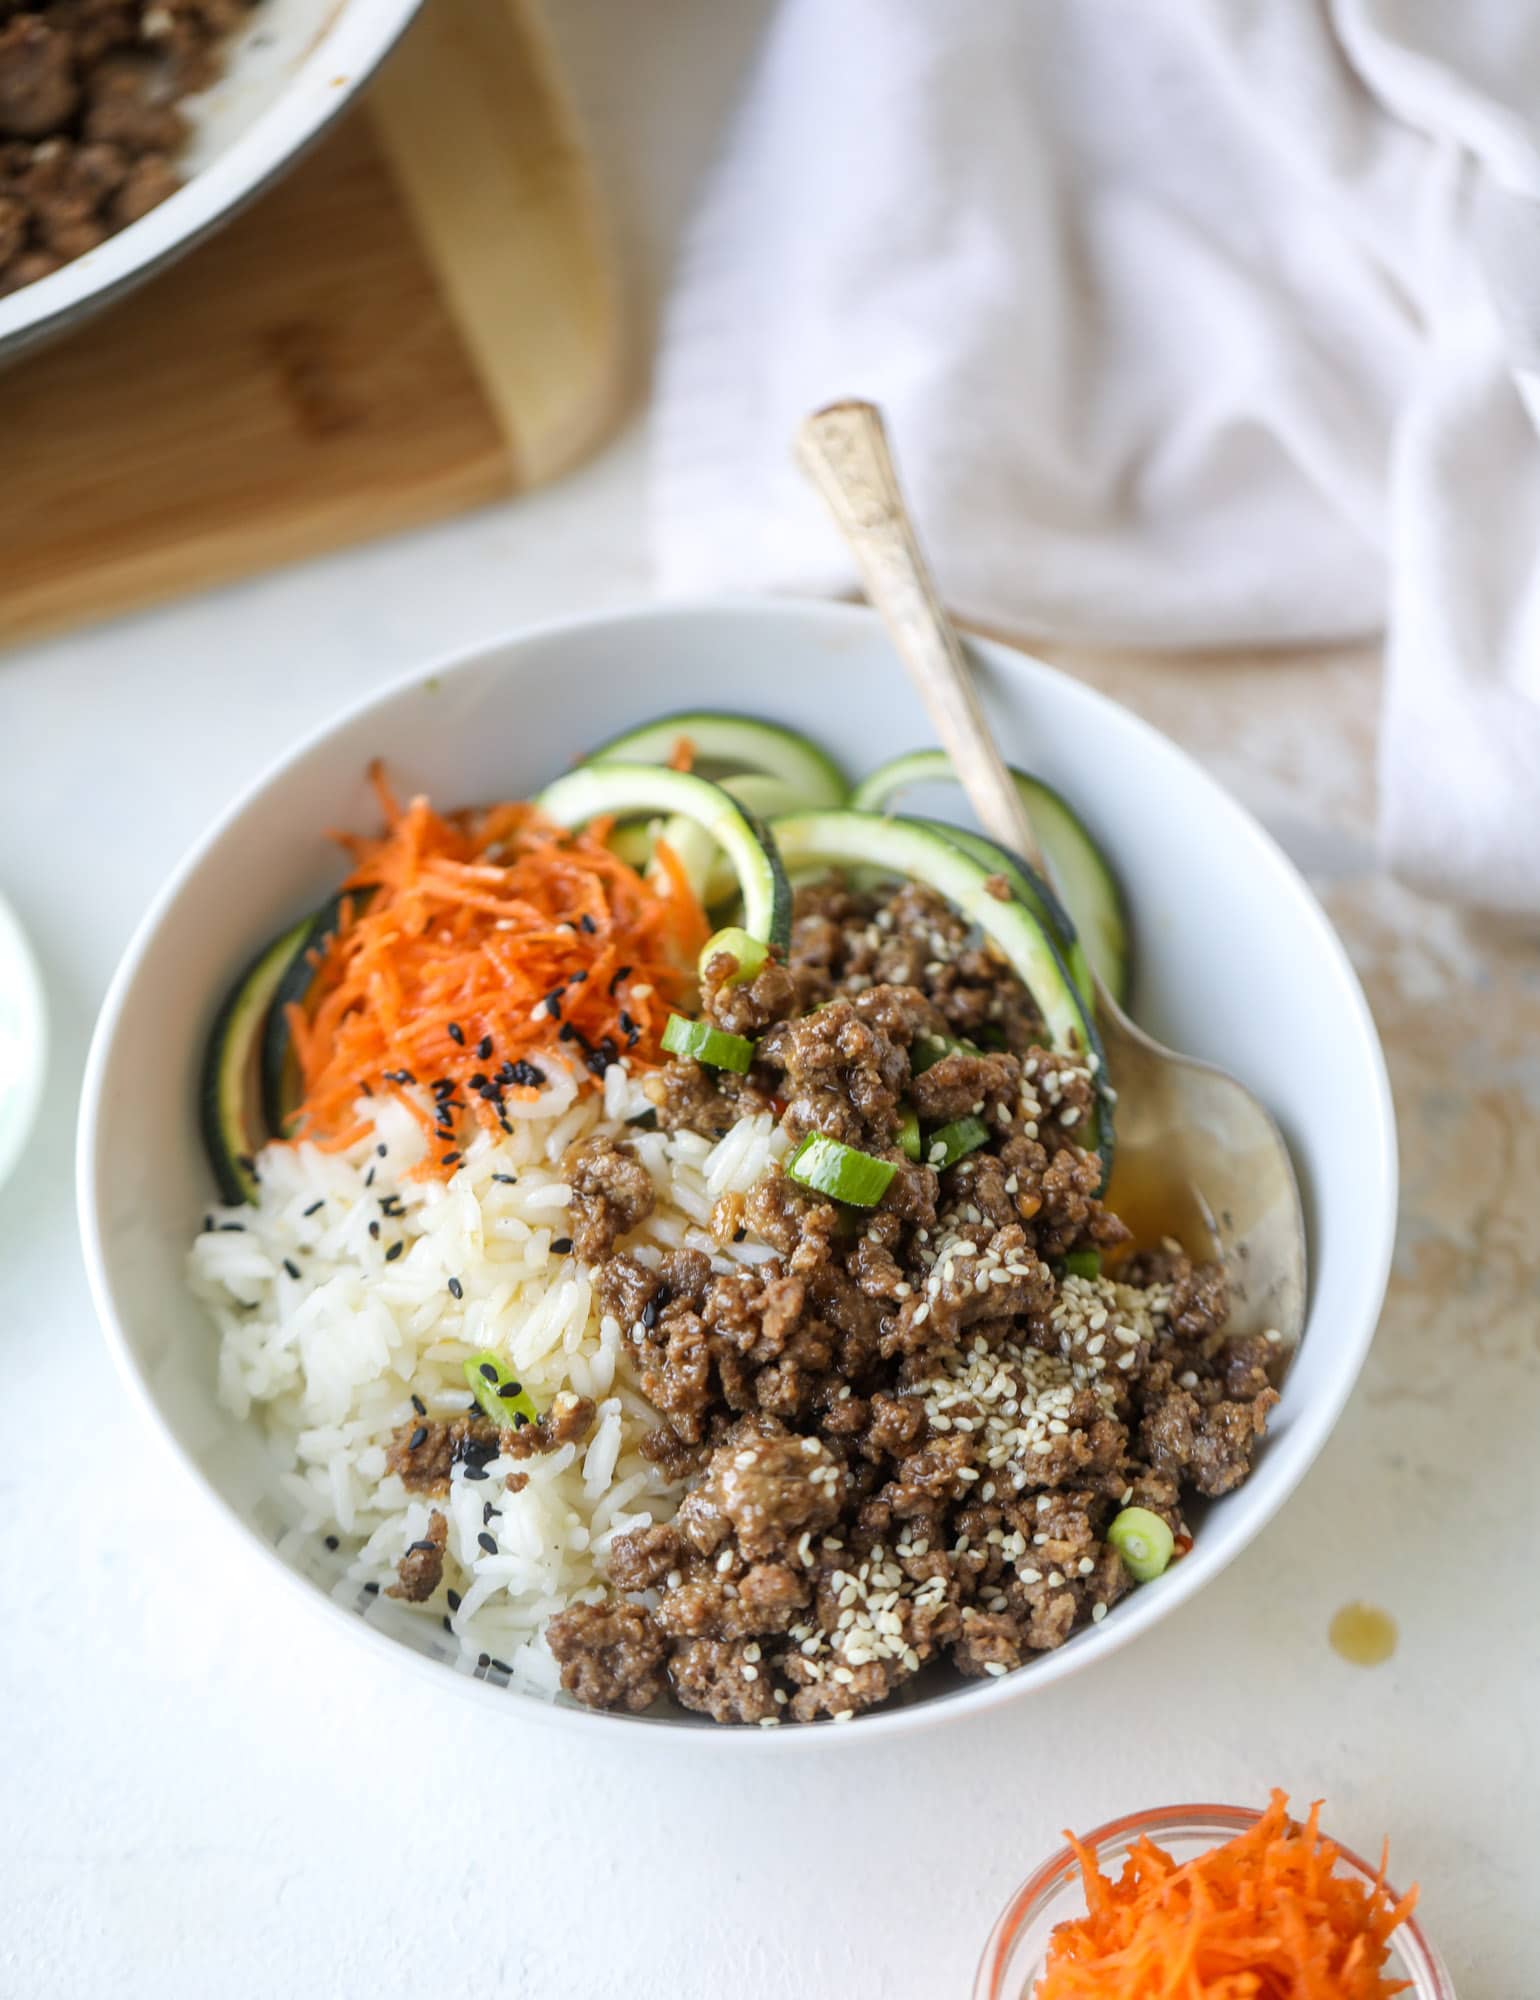 These korean beef bowls are so packed full of flavor that you won't want to eat anything else! Serve the beef with zucchini noodles, grated carrot and jasmine rice for a satisfying, flavor-packed bowl that comes together easily and quick! I howsweeteats.com #korean #beef